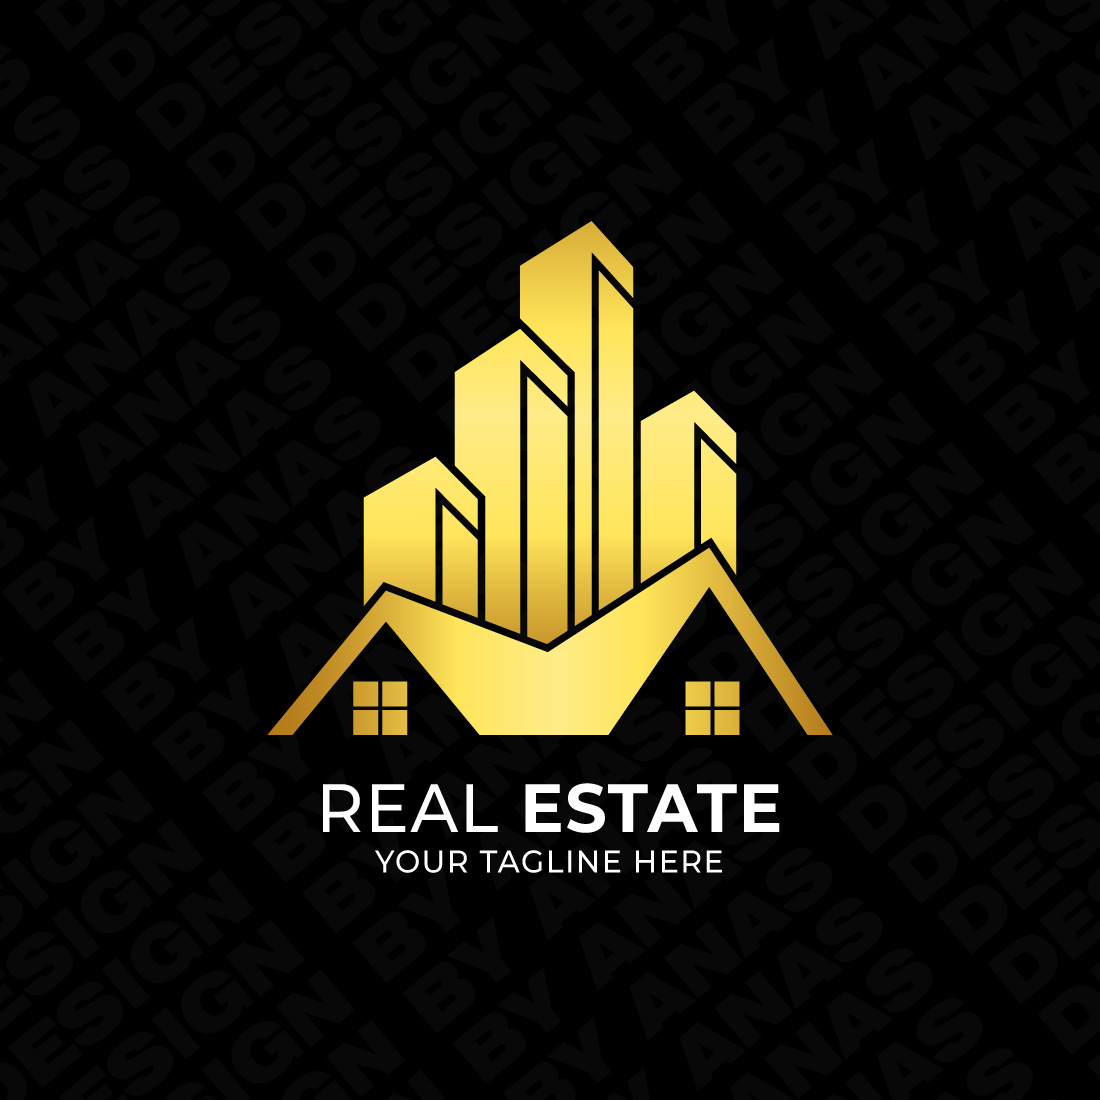 Real Estate Logo Design, Building Logo Template – ONLY $9 preview image.